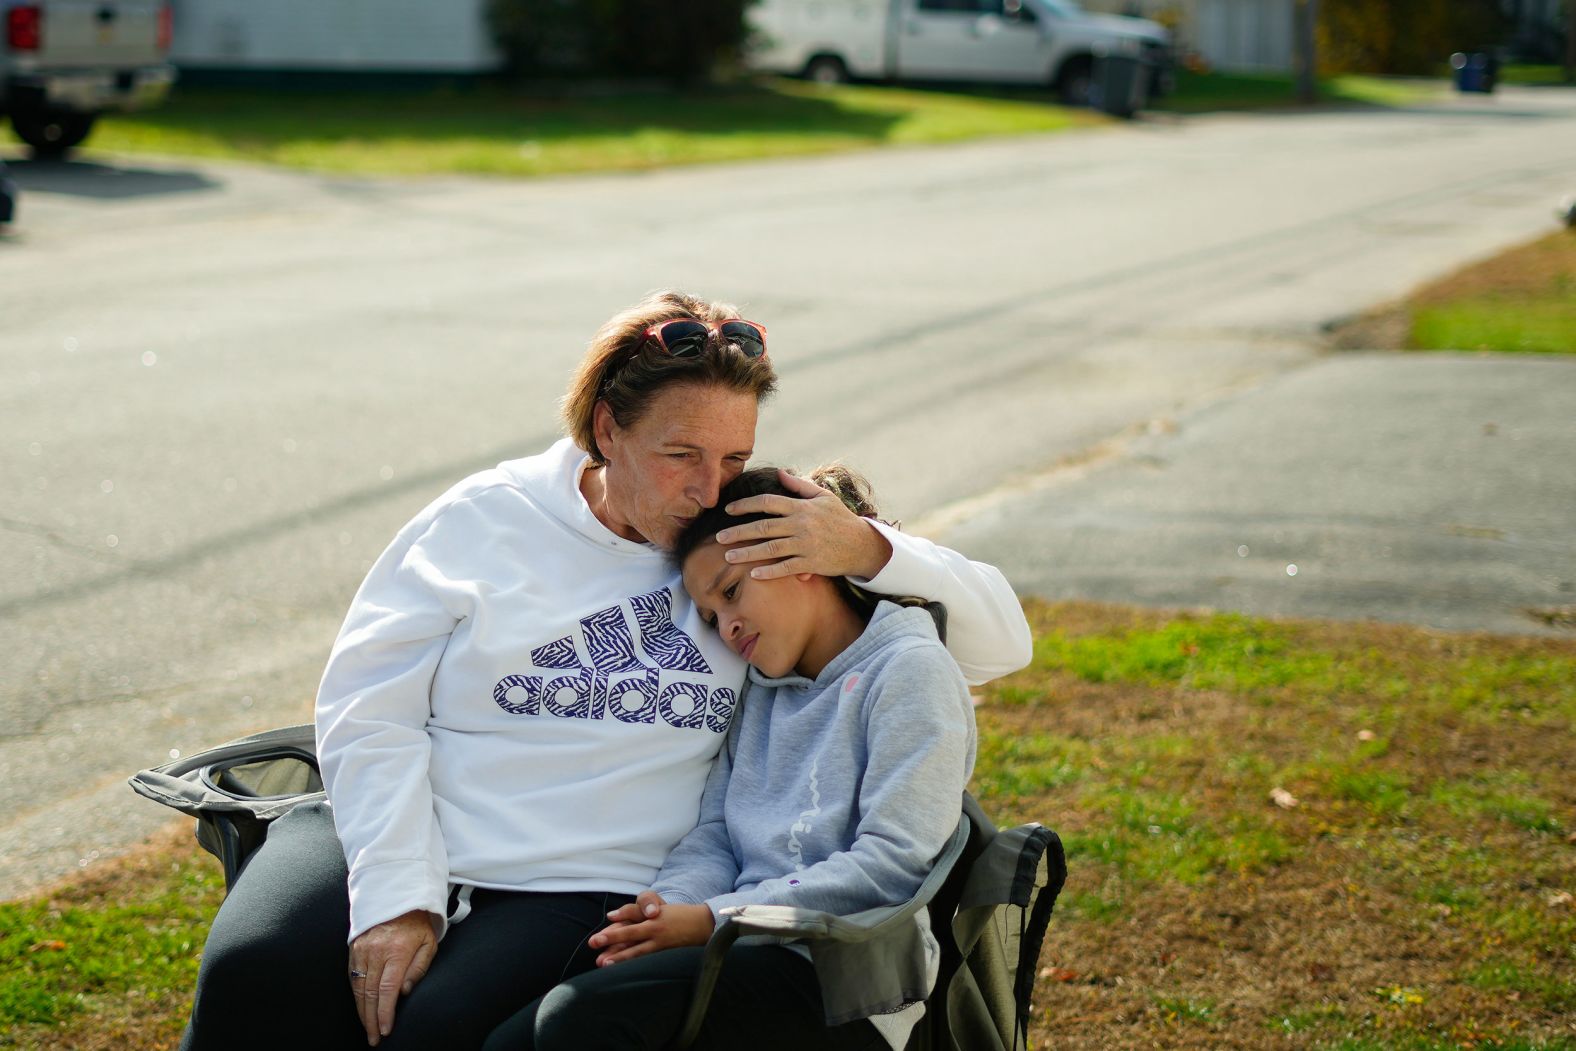 Tammy Asselin, who was at the Schemengees Bar and Grille with her daughter, Toni, during the shooting, embrace during an interview in Lewiston, Maine, on Friday. Tricia Asselin, one of the <a href="https://www.cnn.com/2023/10/27/us/these-are-the-victims-of-the-maine-mass-shootings" target="_blank">victims</a> of the shooting, is Tammy's cousin, according to the <a href="https://apnews.com/article/maine-shooting-victims-1be7d14e90ef6c91ca23819163d29f3e" target="_blank" target="_blank">Associated Press</a>.